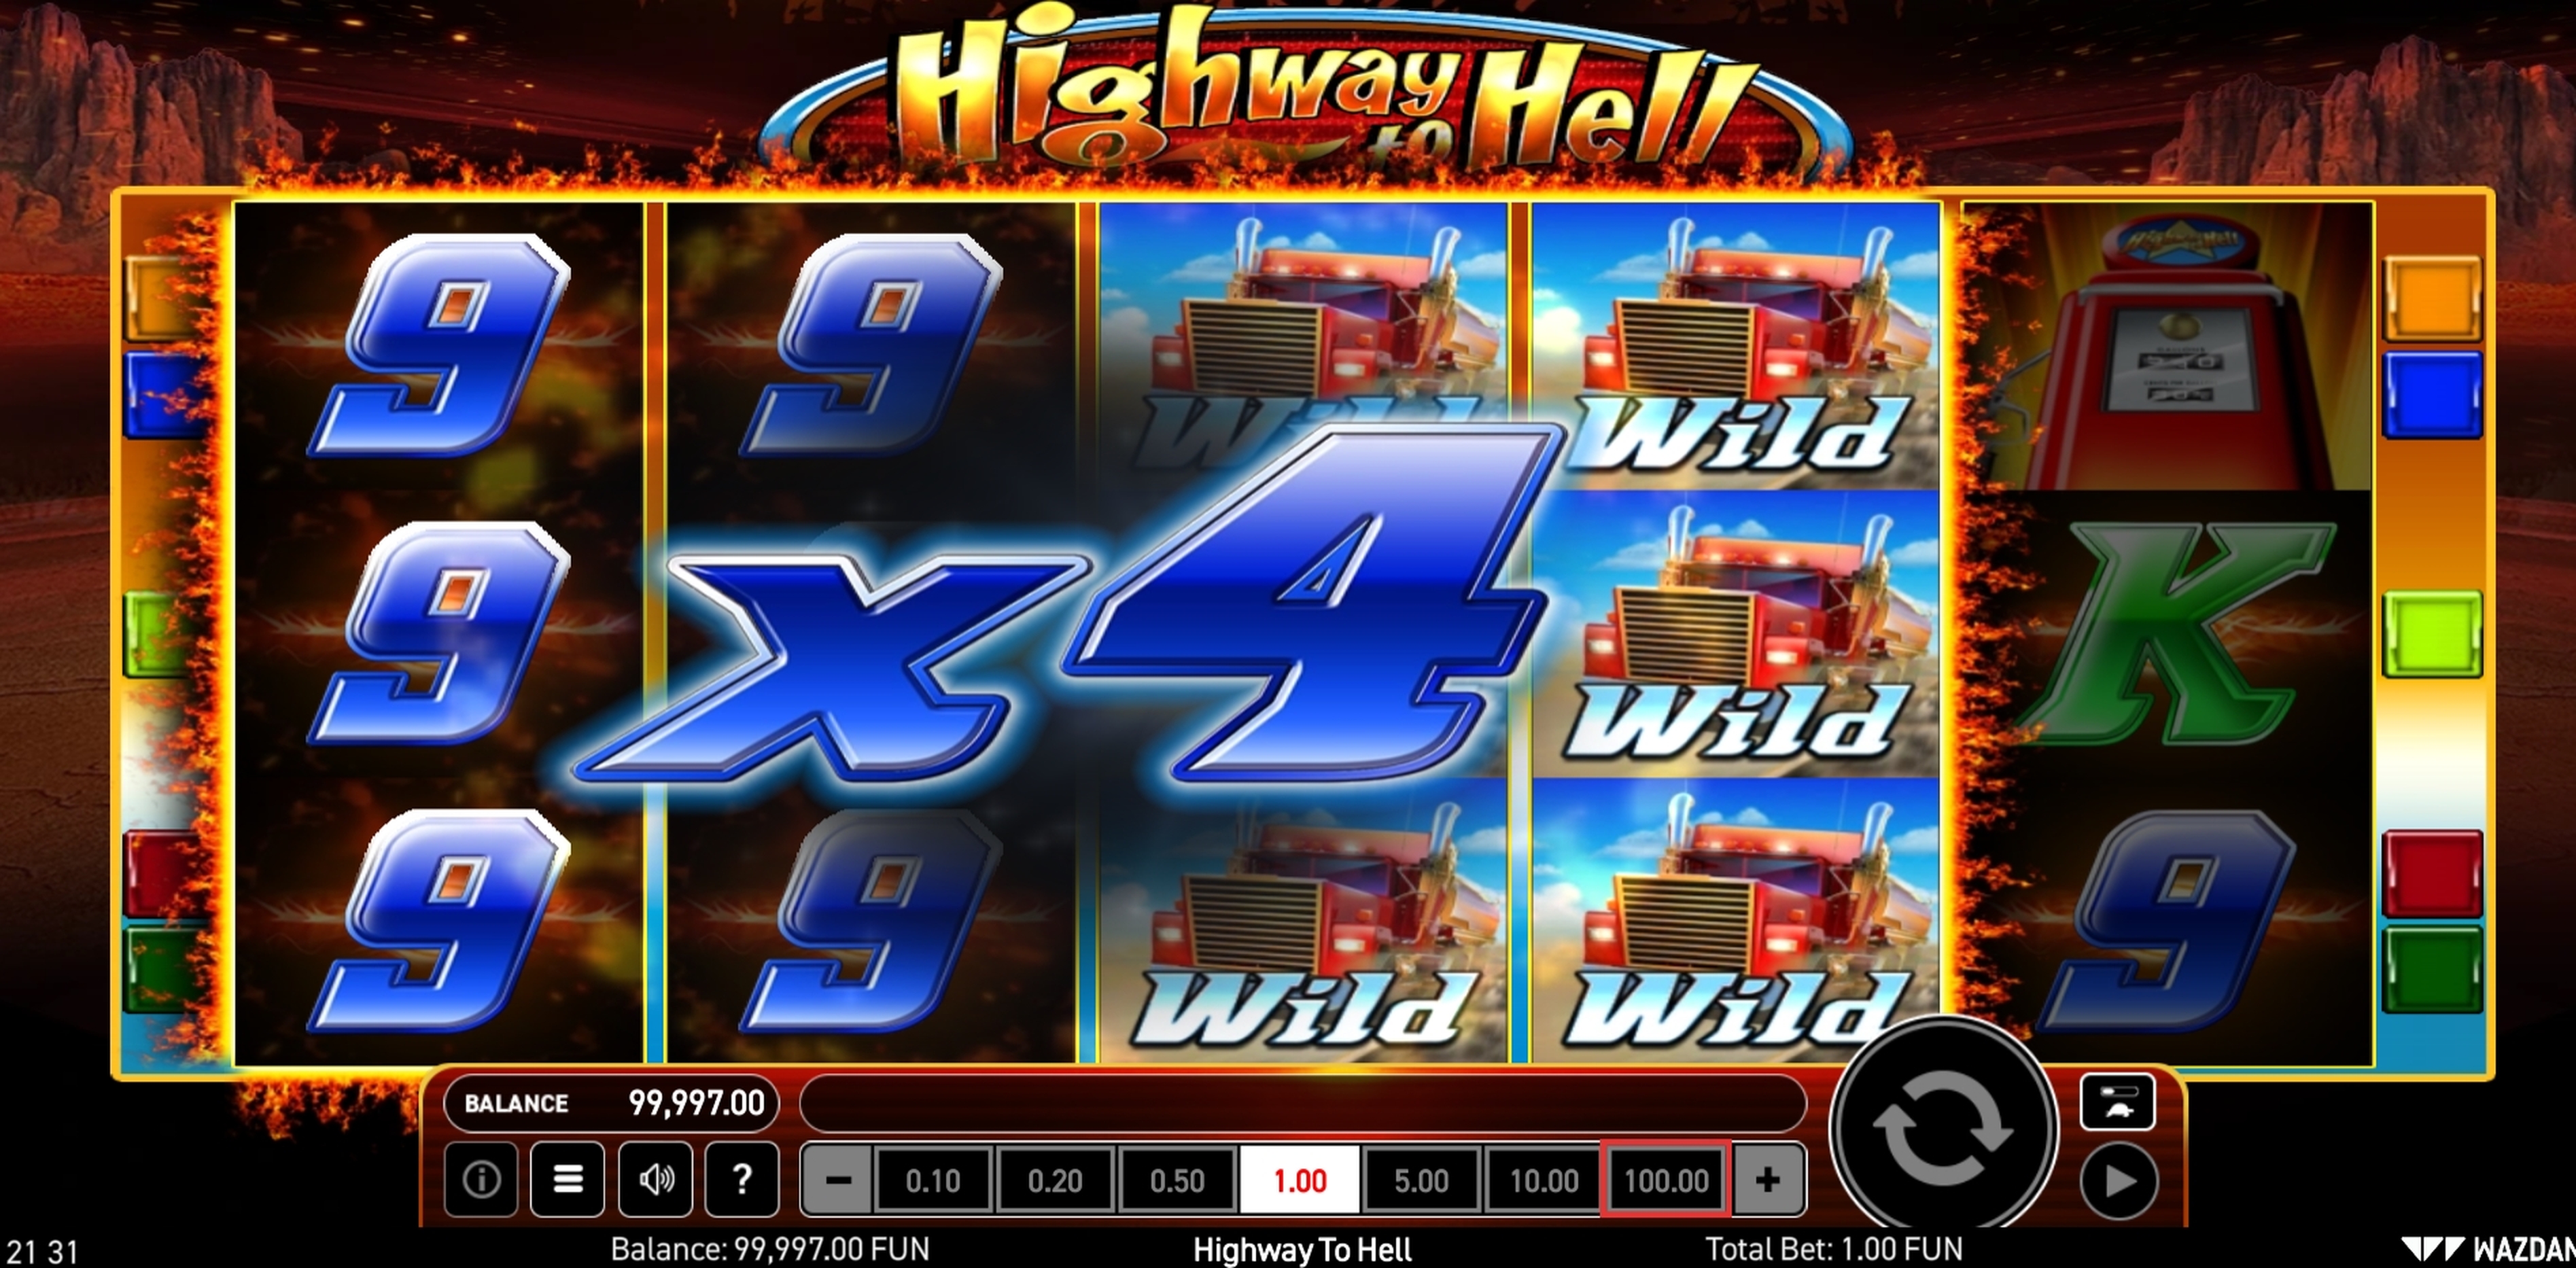 Win Money in Highway to Hell Free Slot Game by Wazdan